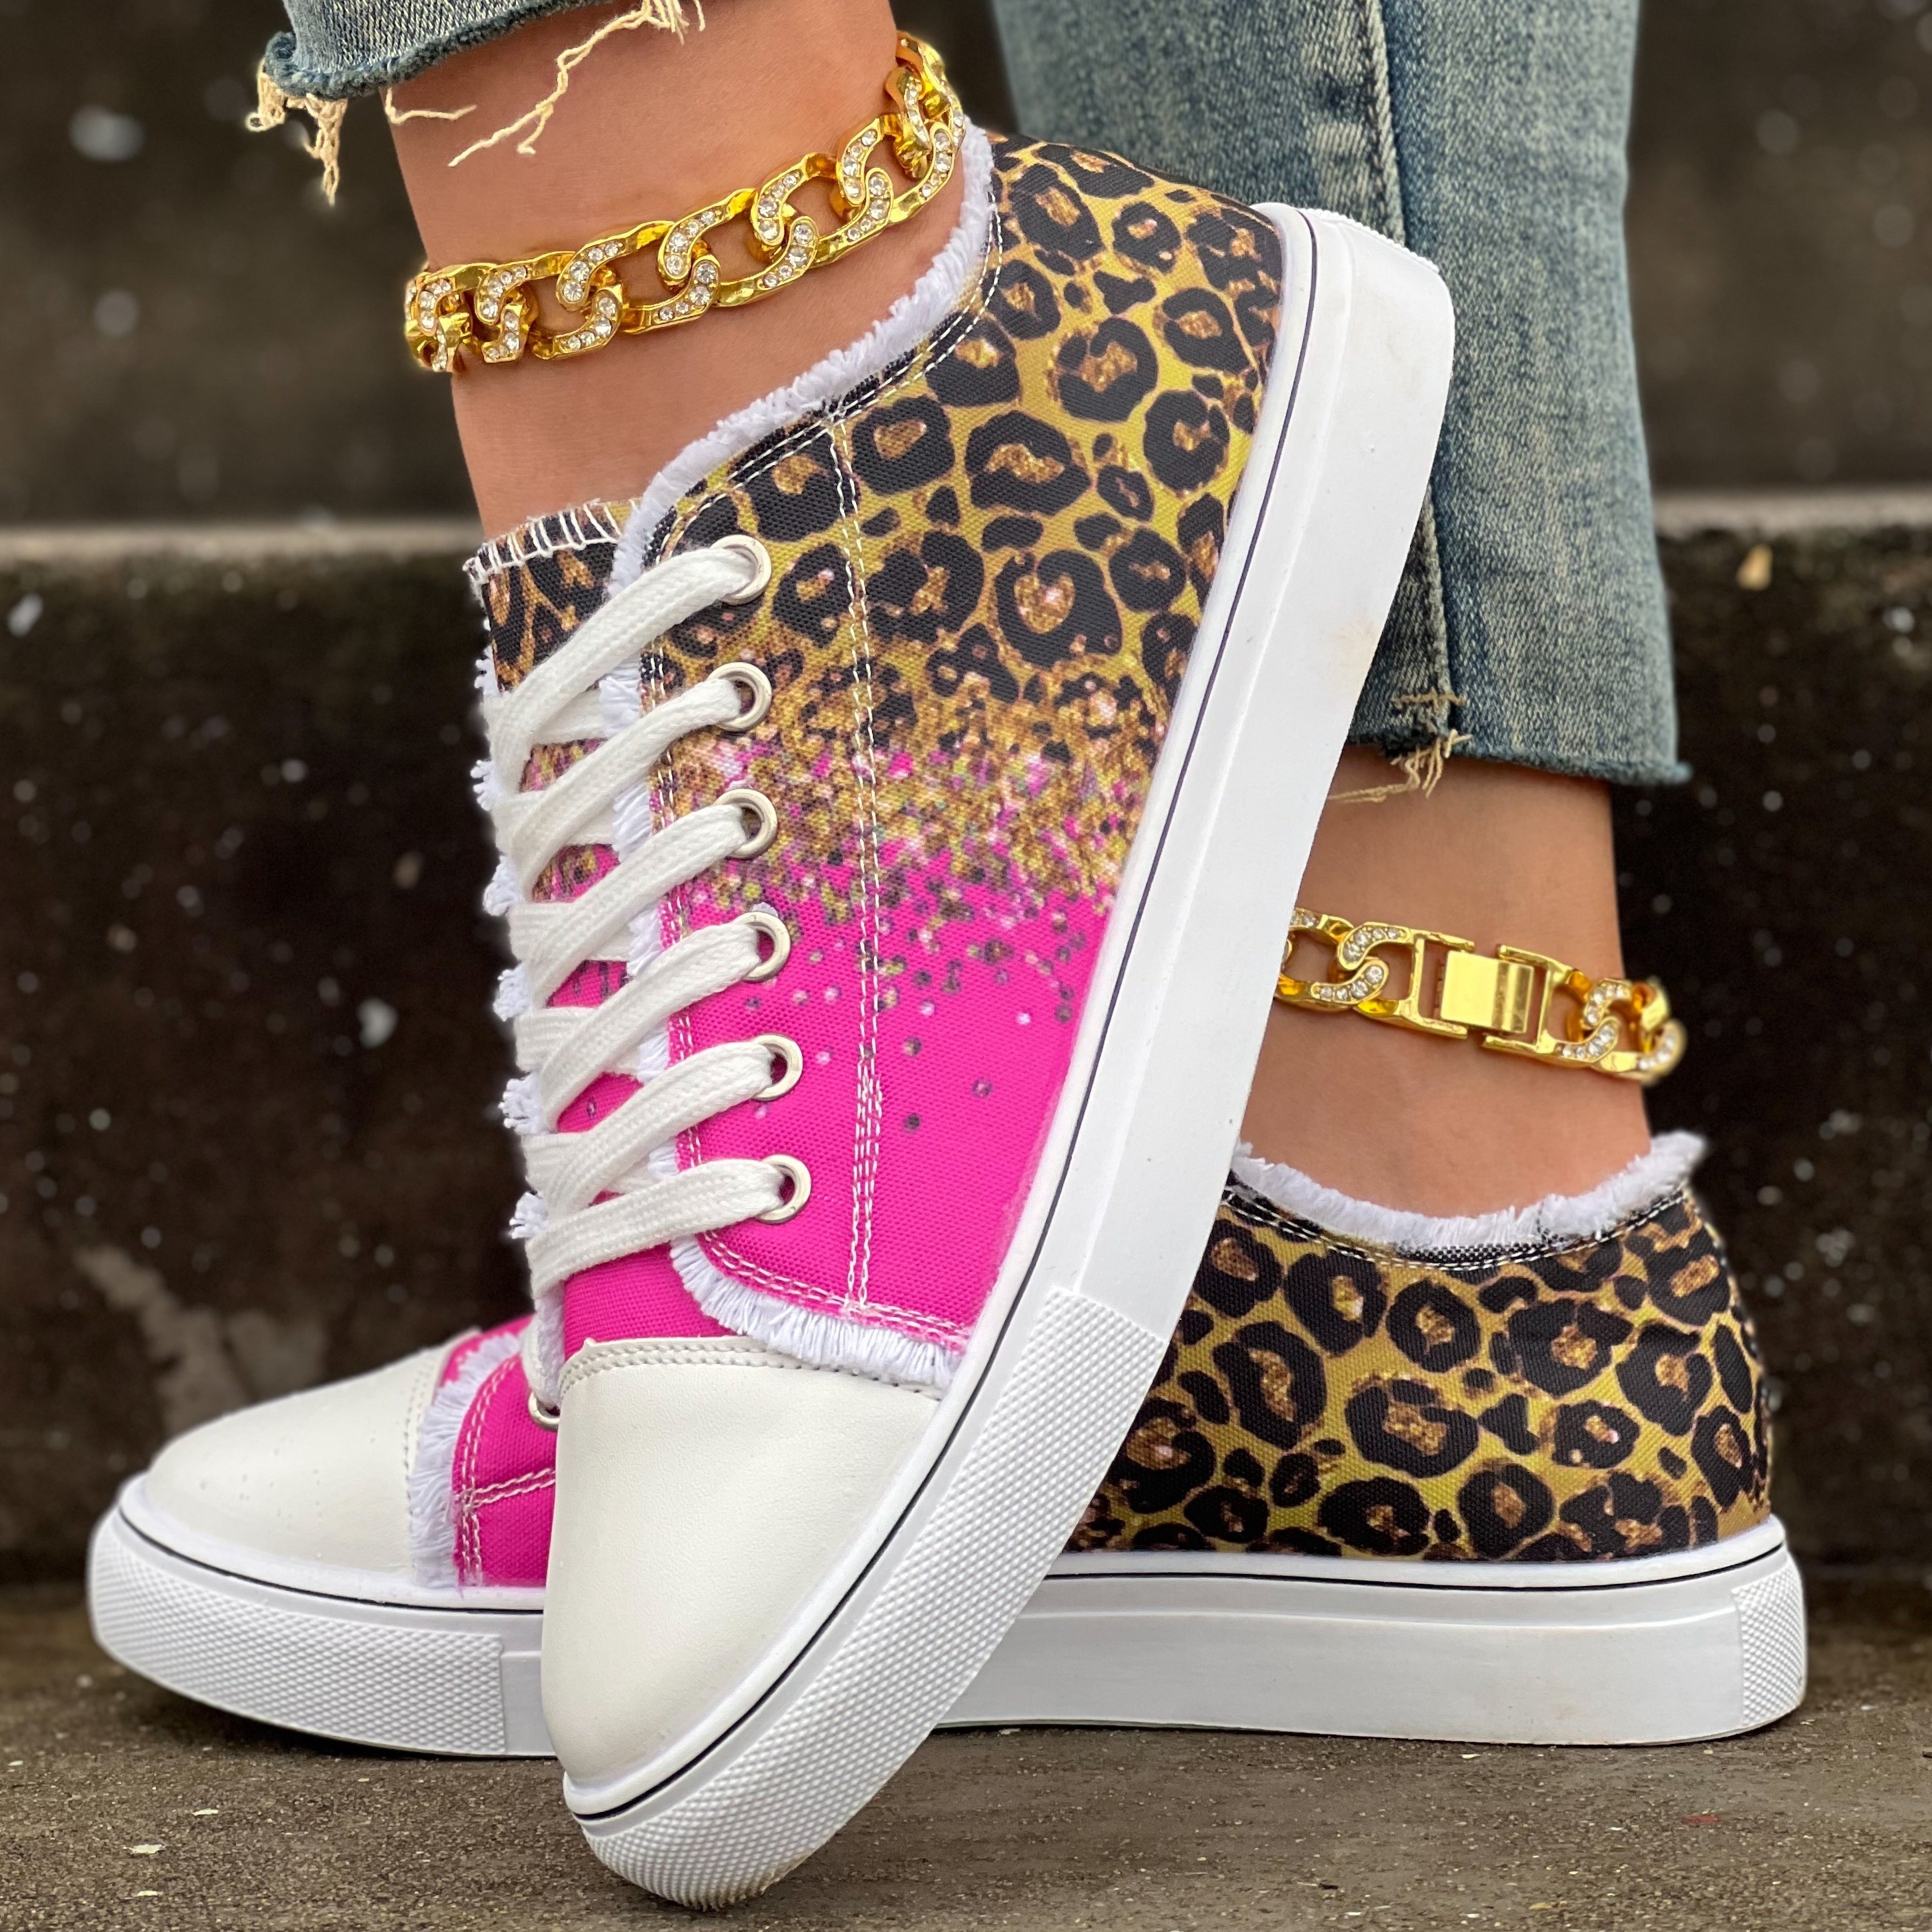 Women's Sequins Pattern Sneakers, Rhinestone Decor Lace Up Low-top Glitter  Shoes, Casual Outdoor Cool Shoes